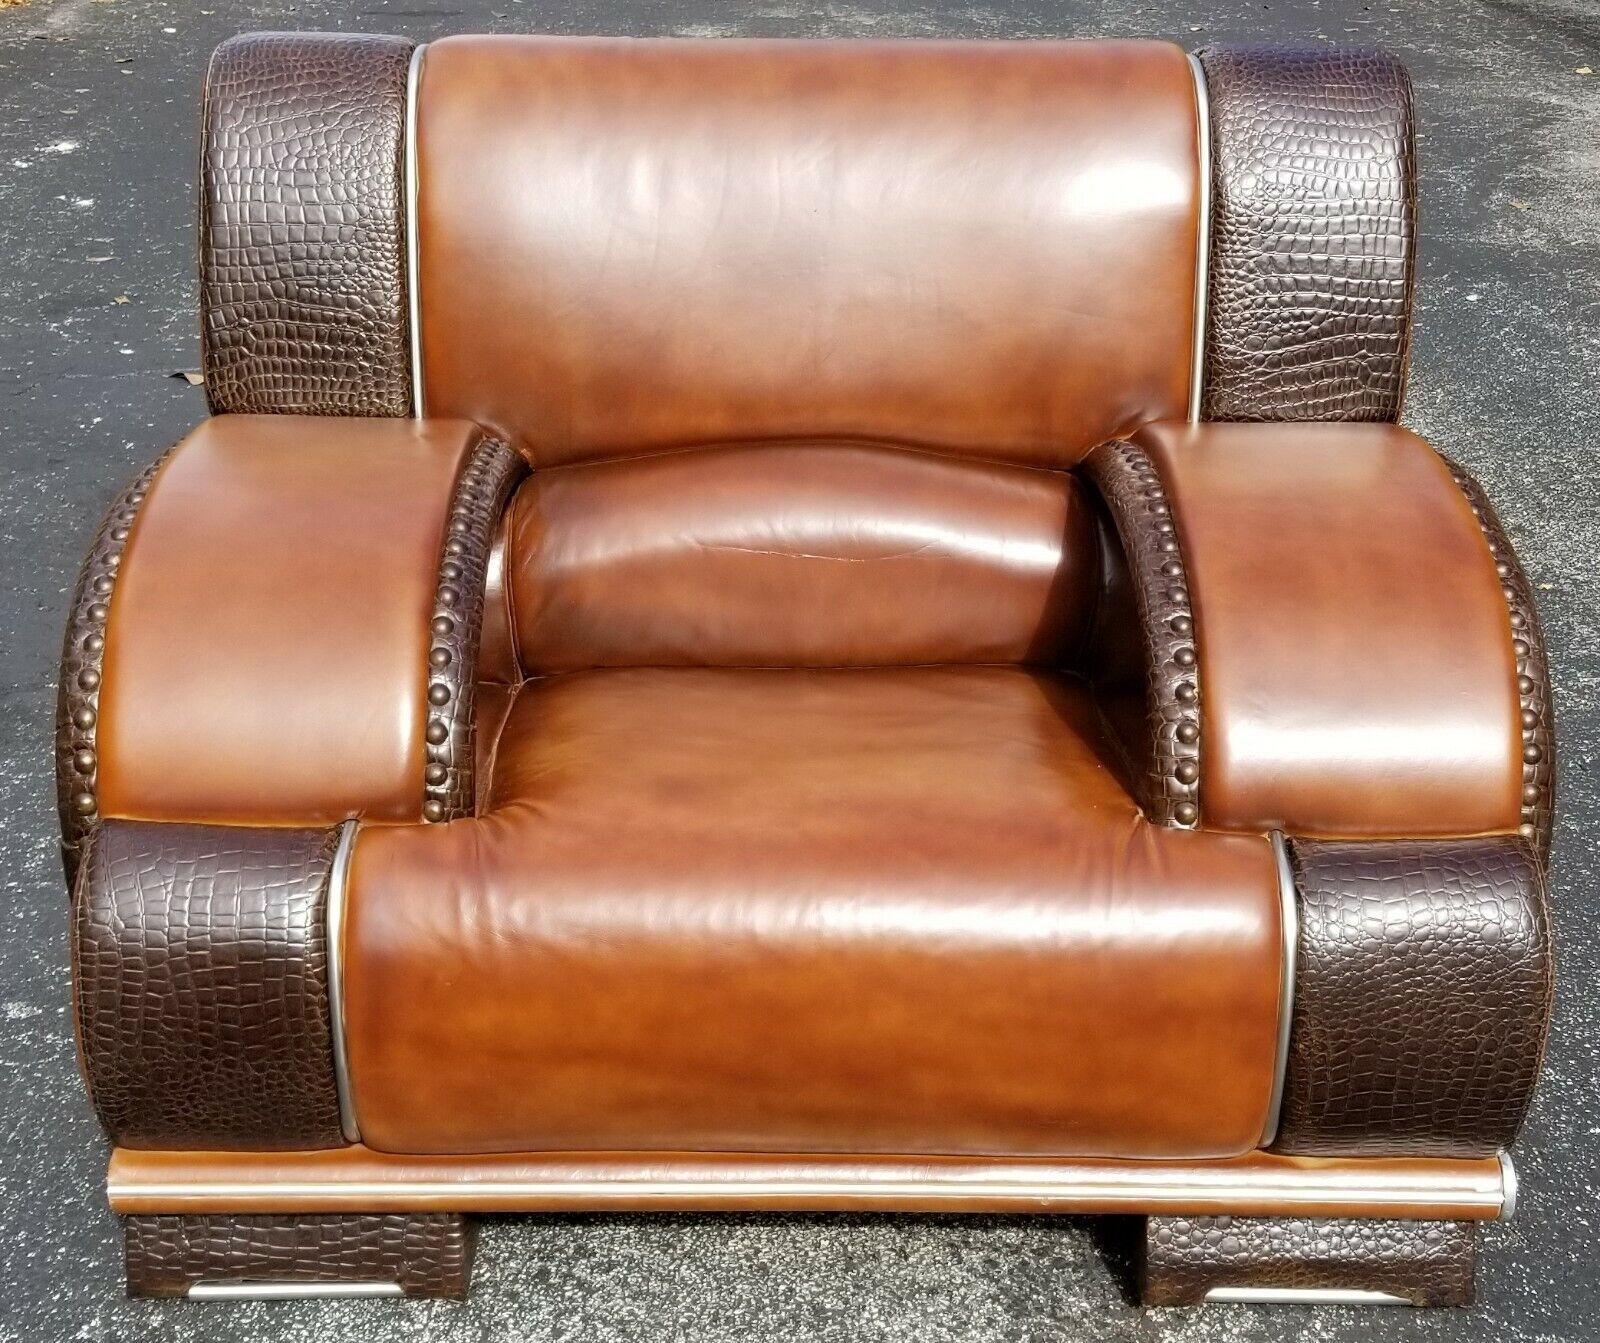 For FULL item description click on CONTINUE READING at the bottom of this page.

Offering One Of Our Recent Palm Beach Estate Fine Furniture Acquisitions Of An
Exceptional and Very Comfortable Vintage Custom Made Real Leather and Alligator Skin